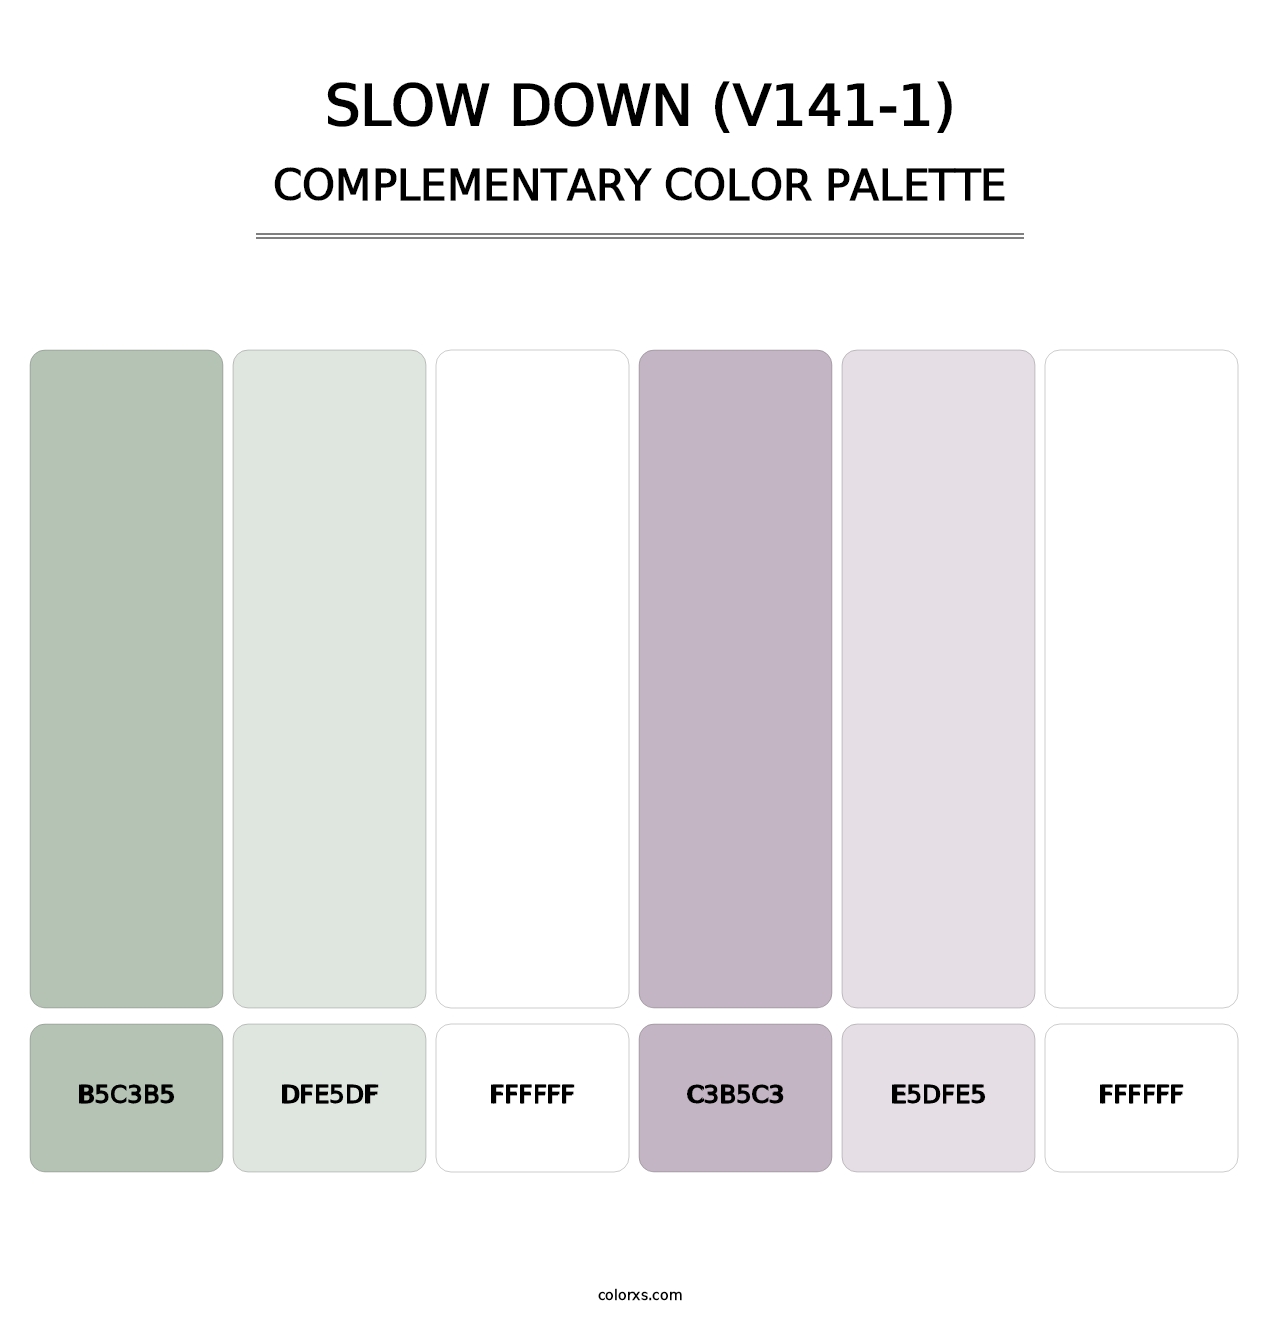 Slow Down (V141-1) - Complementary Color Palette